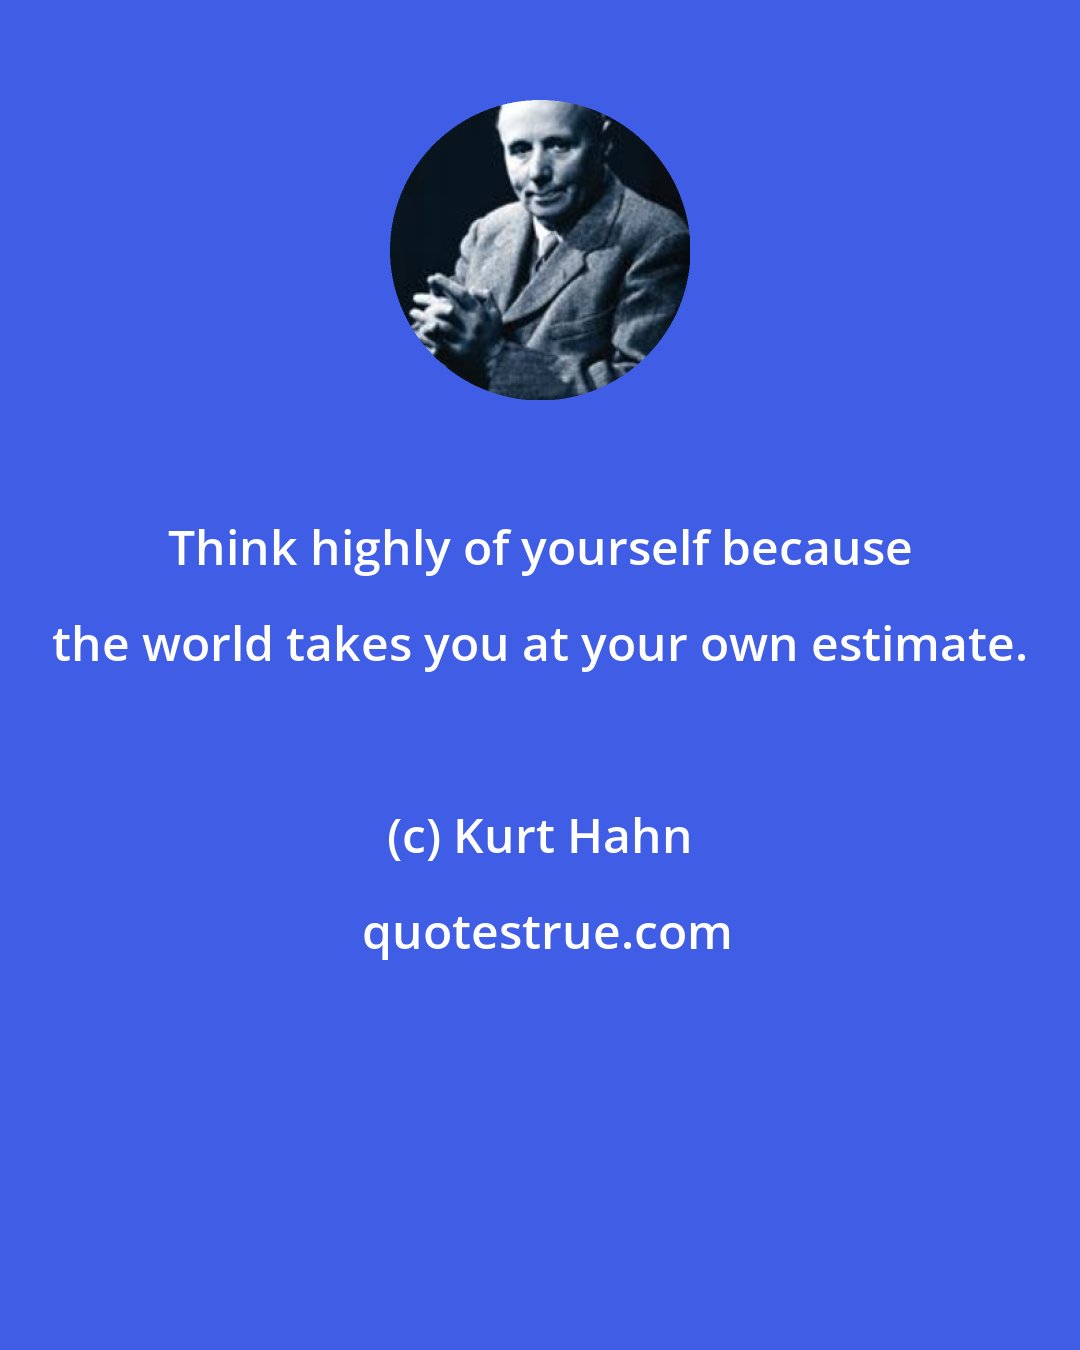 Kurt Hahn: Think highly of yourself because the world takes you at your own estimate.